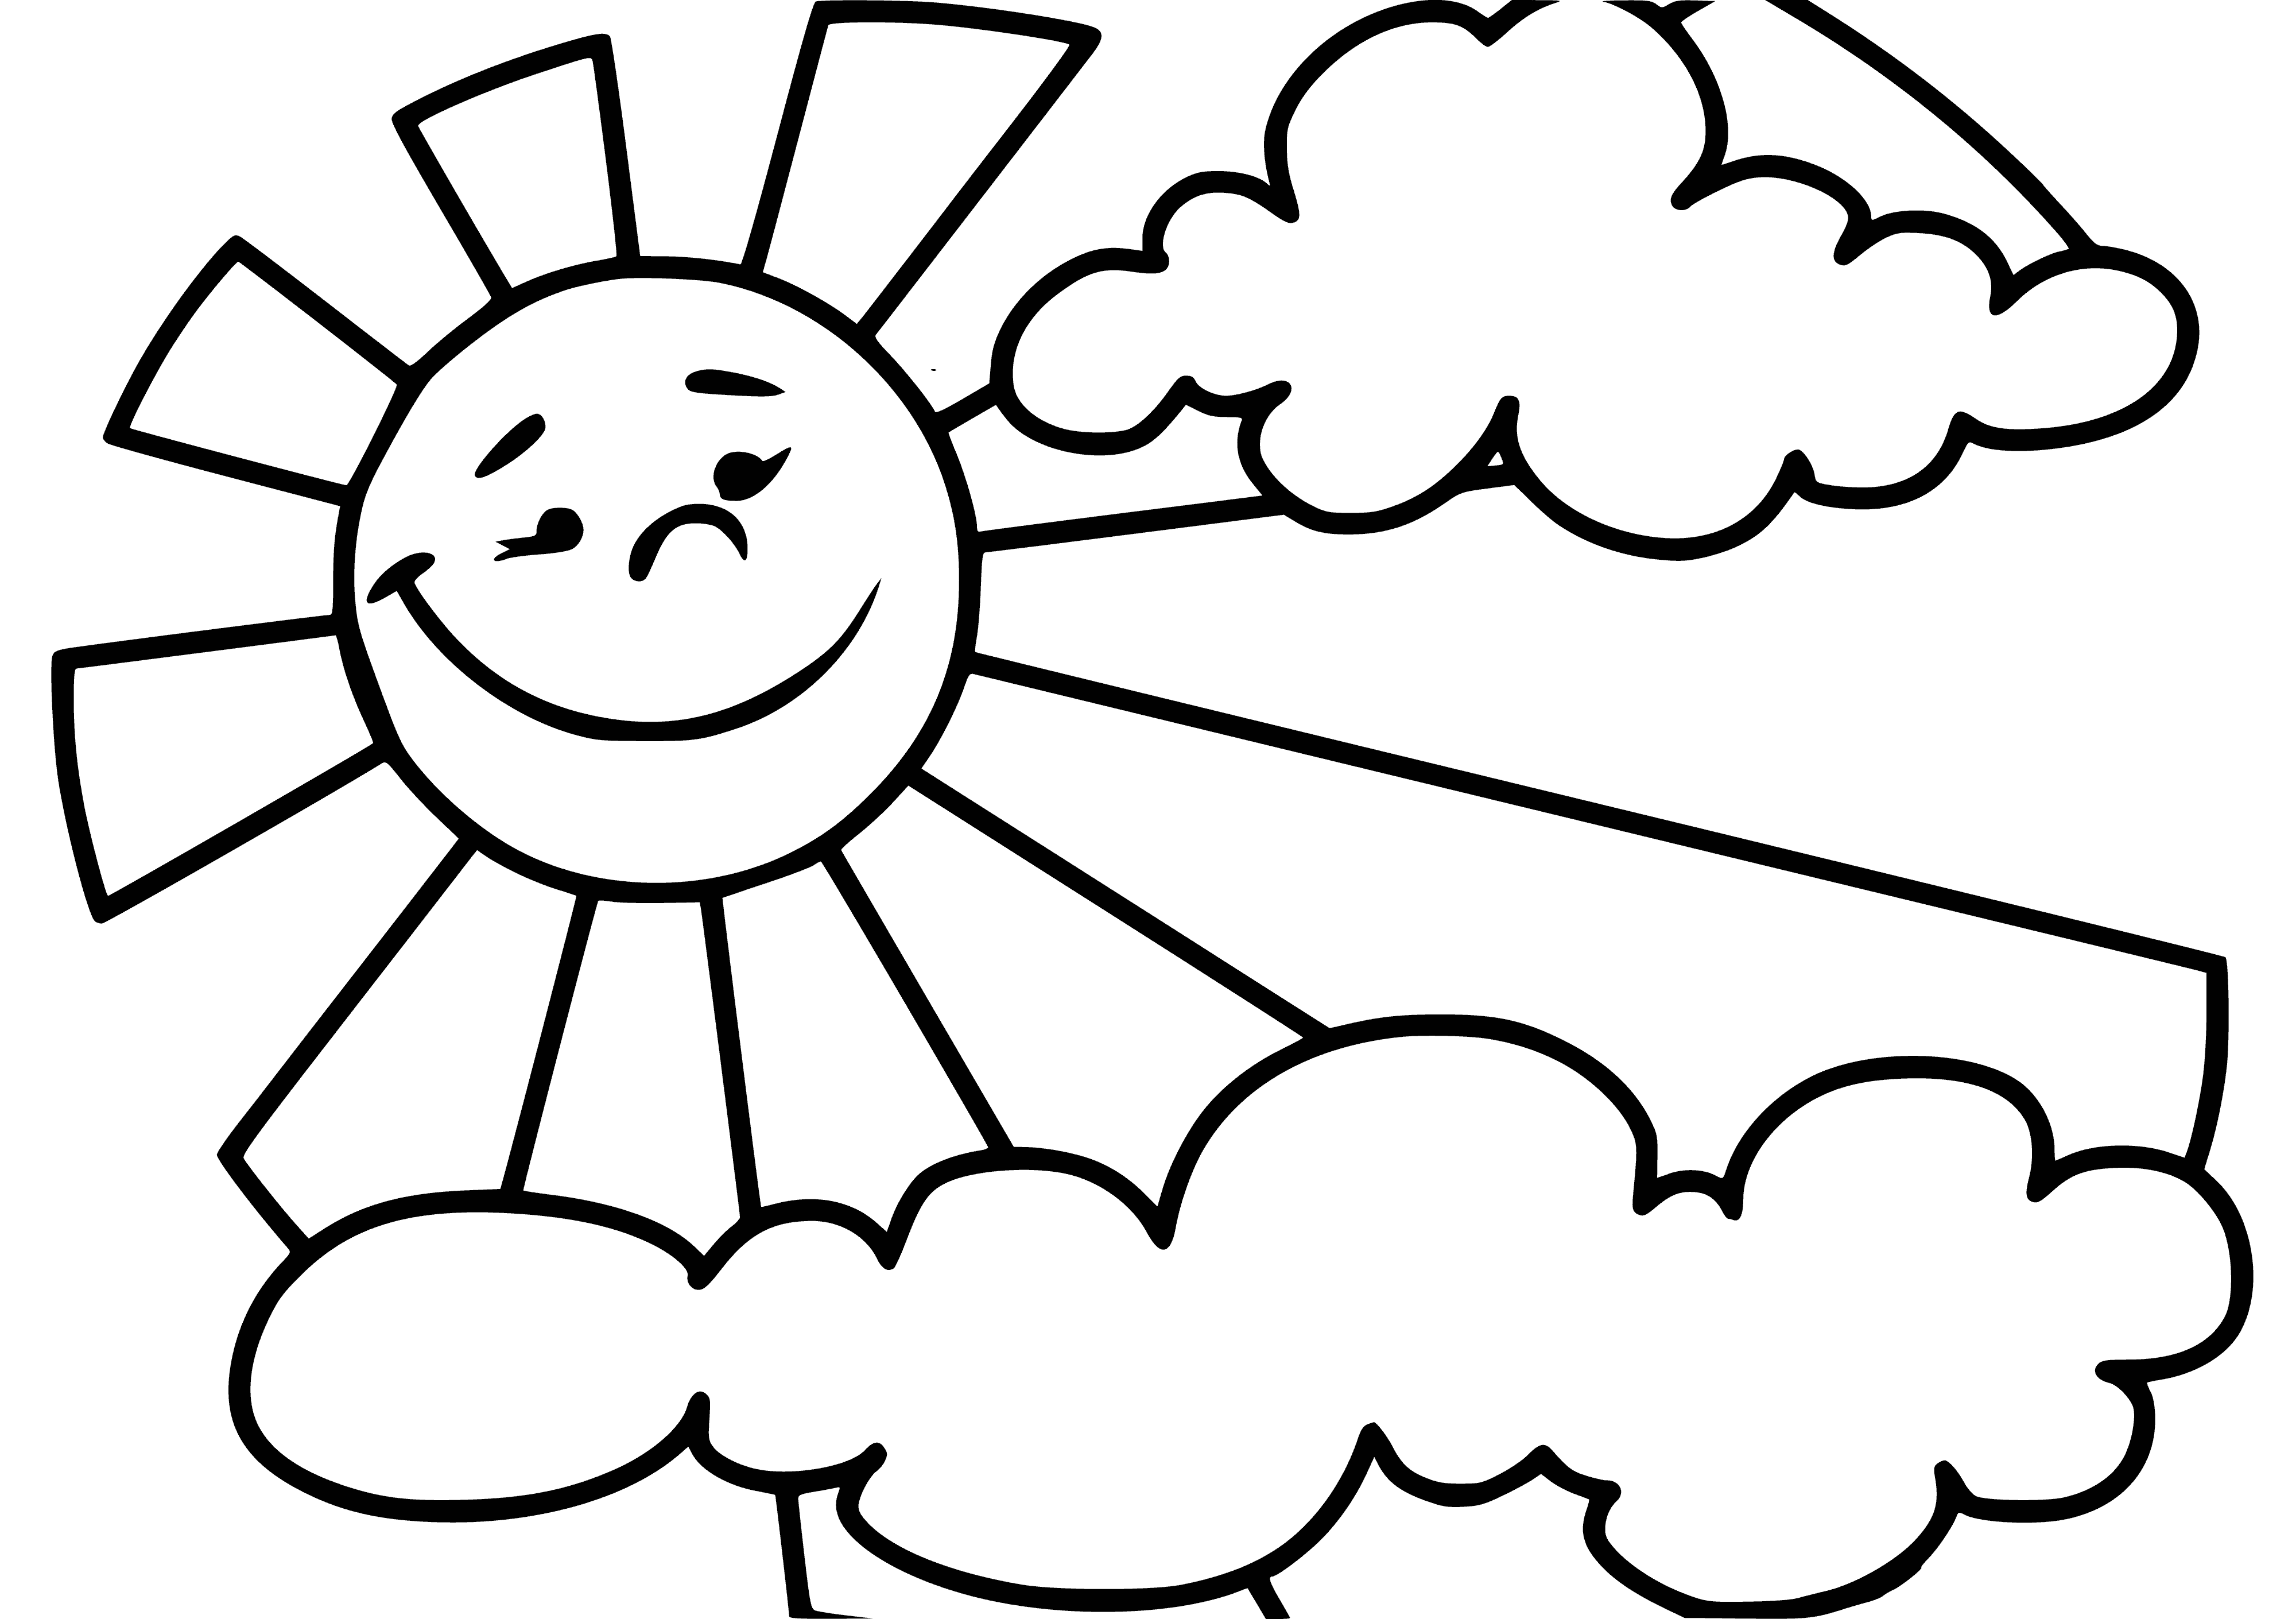 The sun coloring page